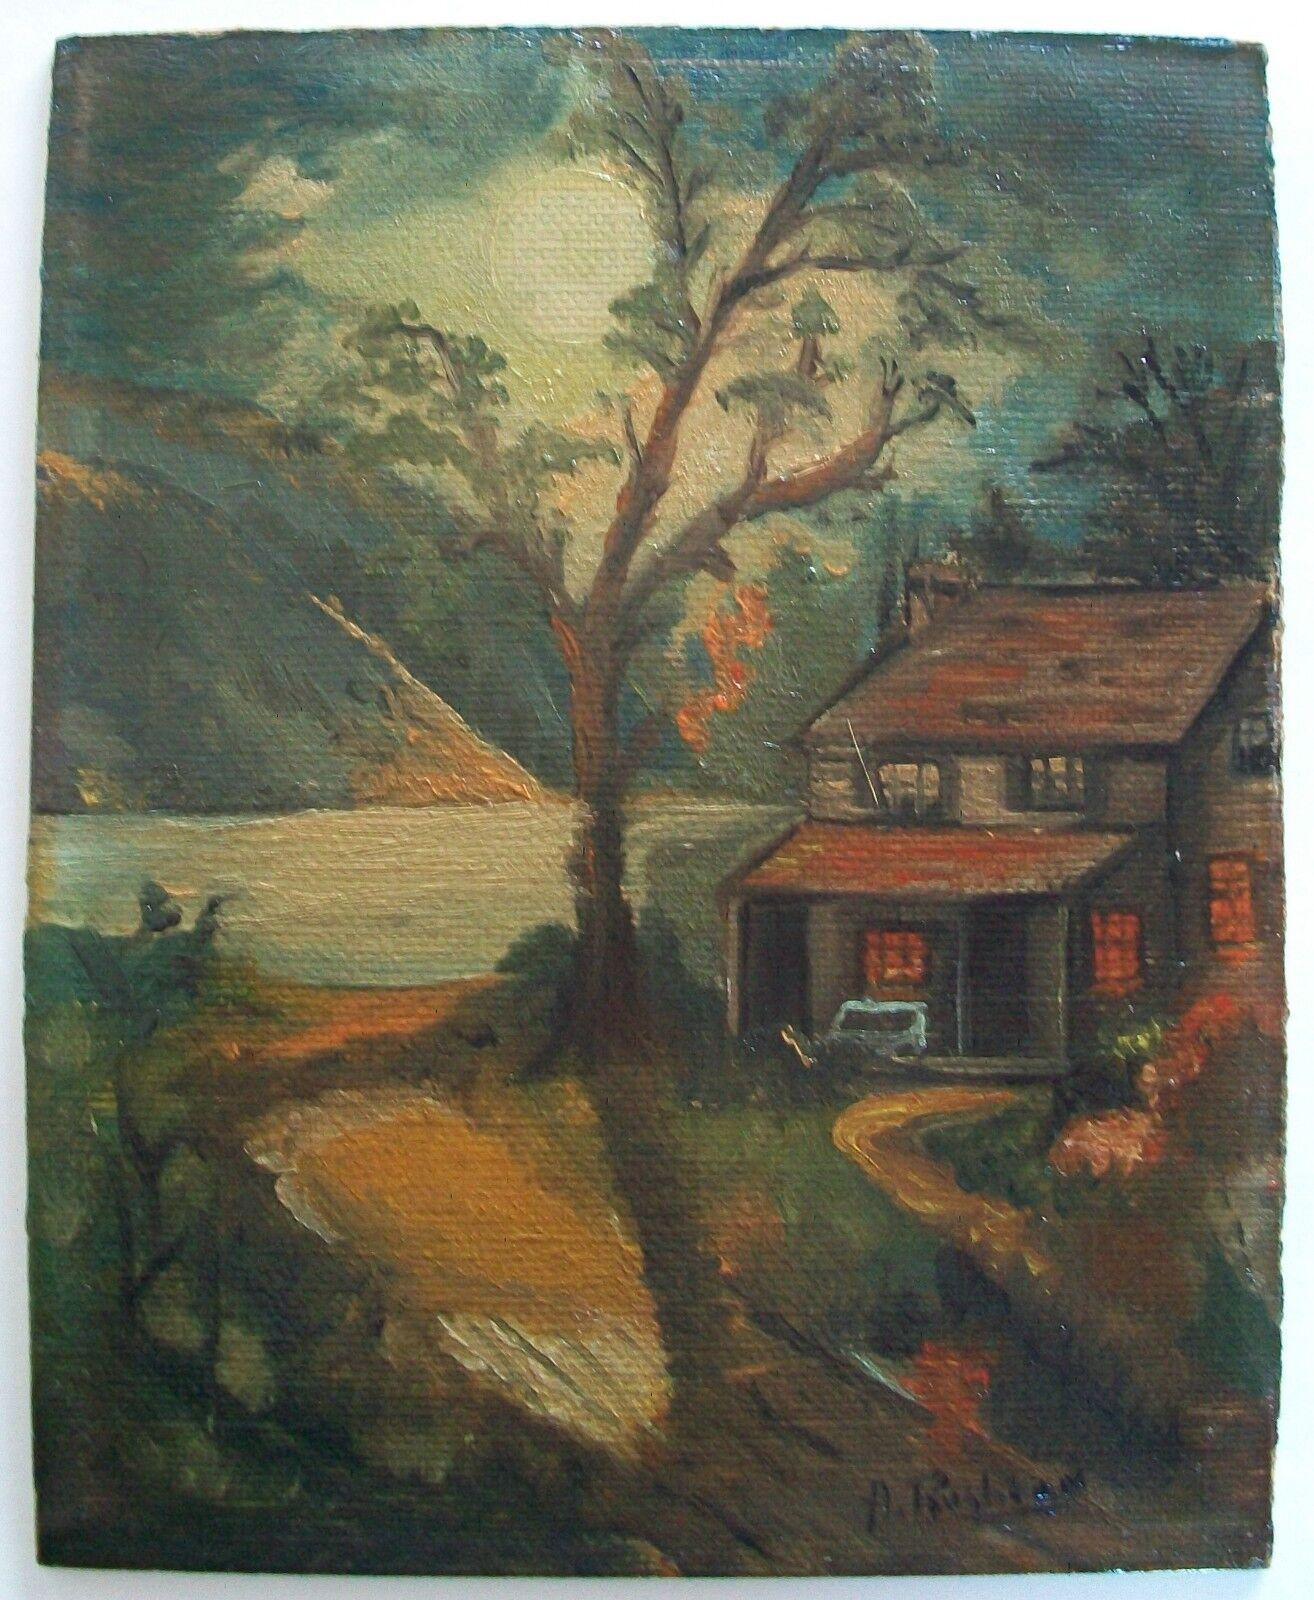 A. RUSHTON - Vintage folk art oil painting on canvas covered panel - signed lower right - framed (likely original) - Canada - mid 20th century.

Good vintage condition - yellowing varnish - no loss - no damage - no restoration - minor scuffs &